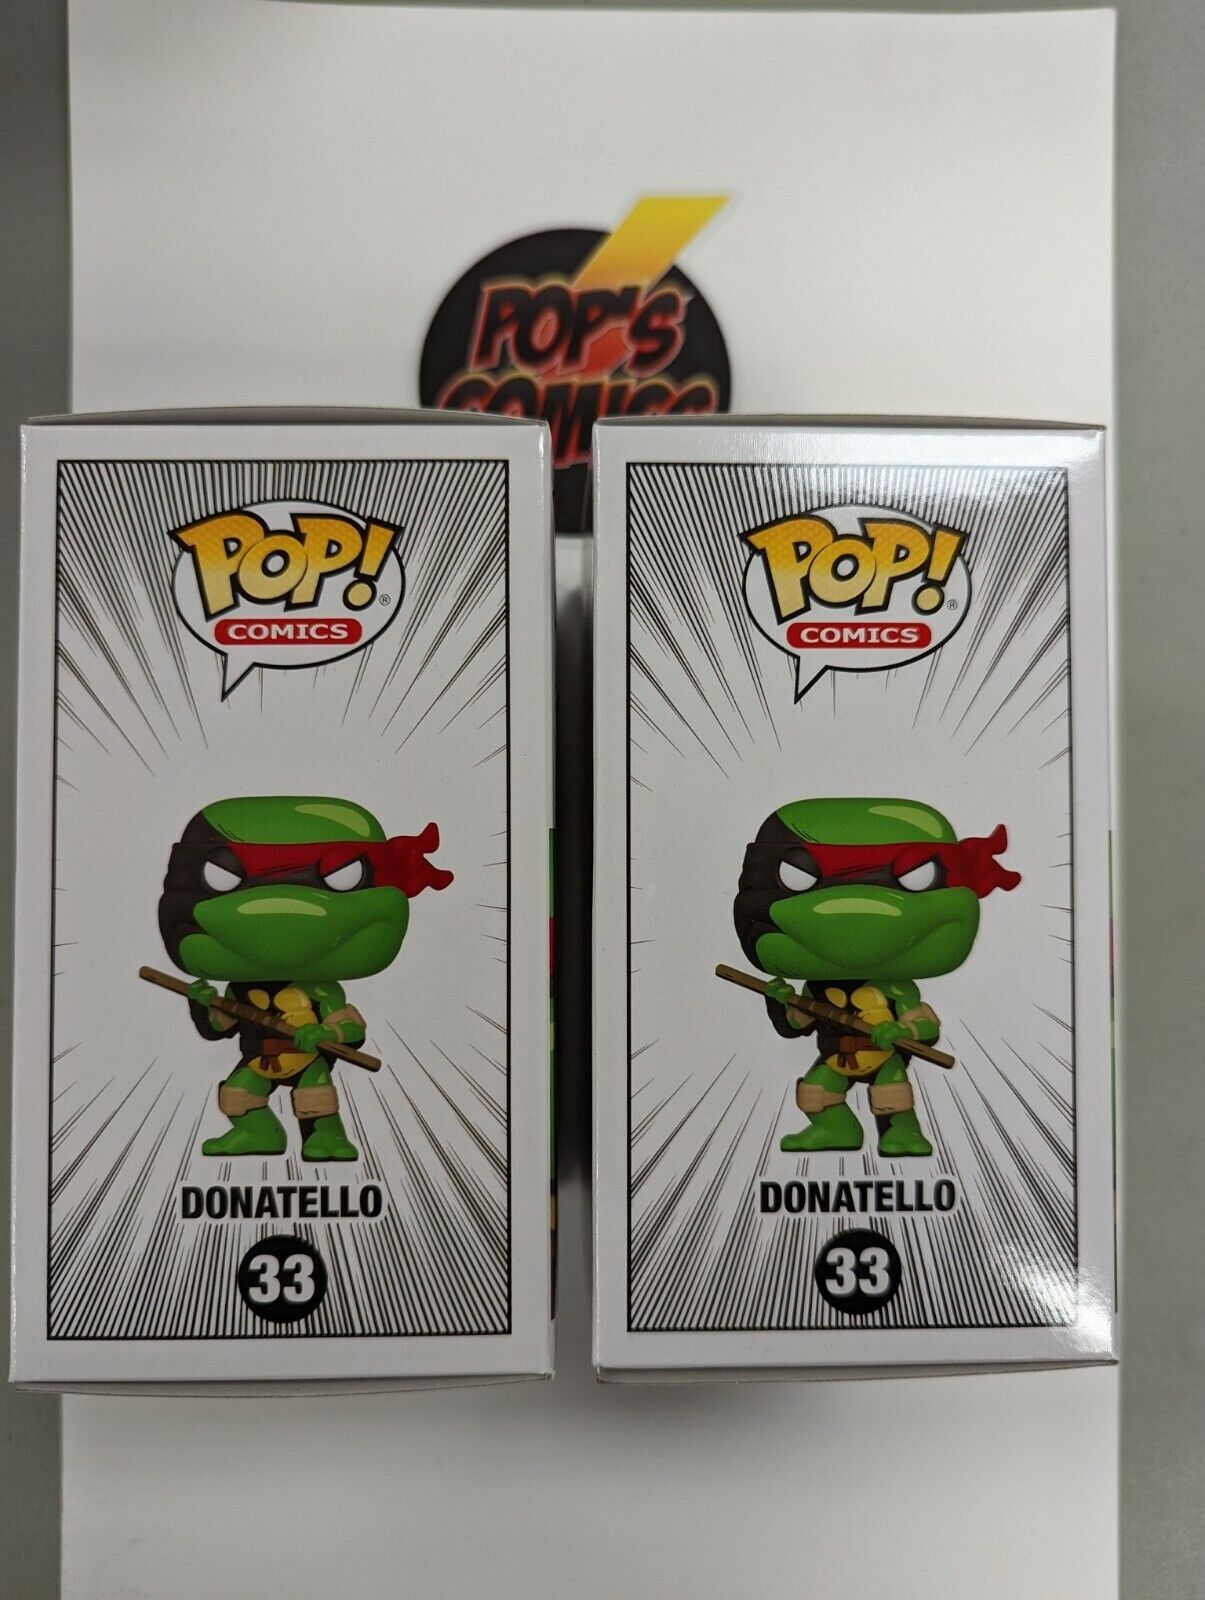 Funko Pop Set Donatello 33 Previews Exclusive & Chase TMNT Eastman and Laird